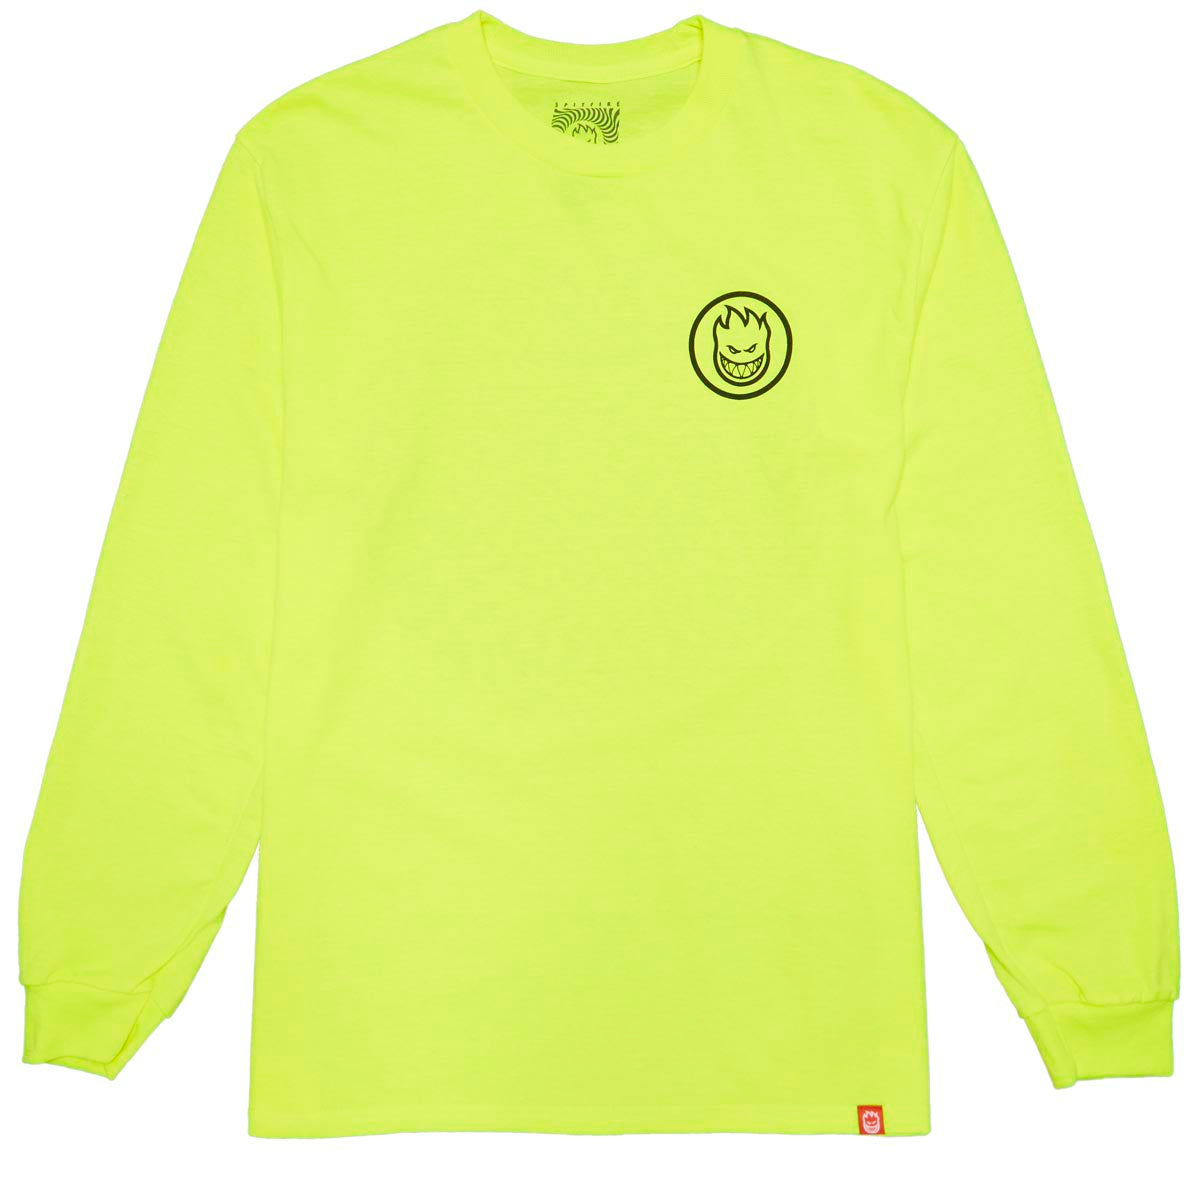 Spitfire Swirled Classic Long Sleeve T-Shirt - Safety Green/Black image 2